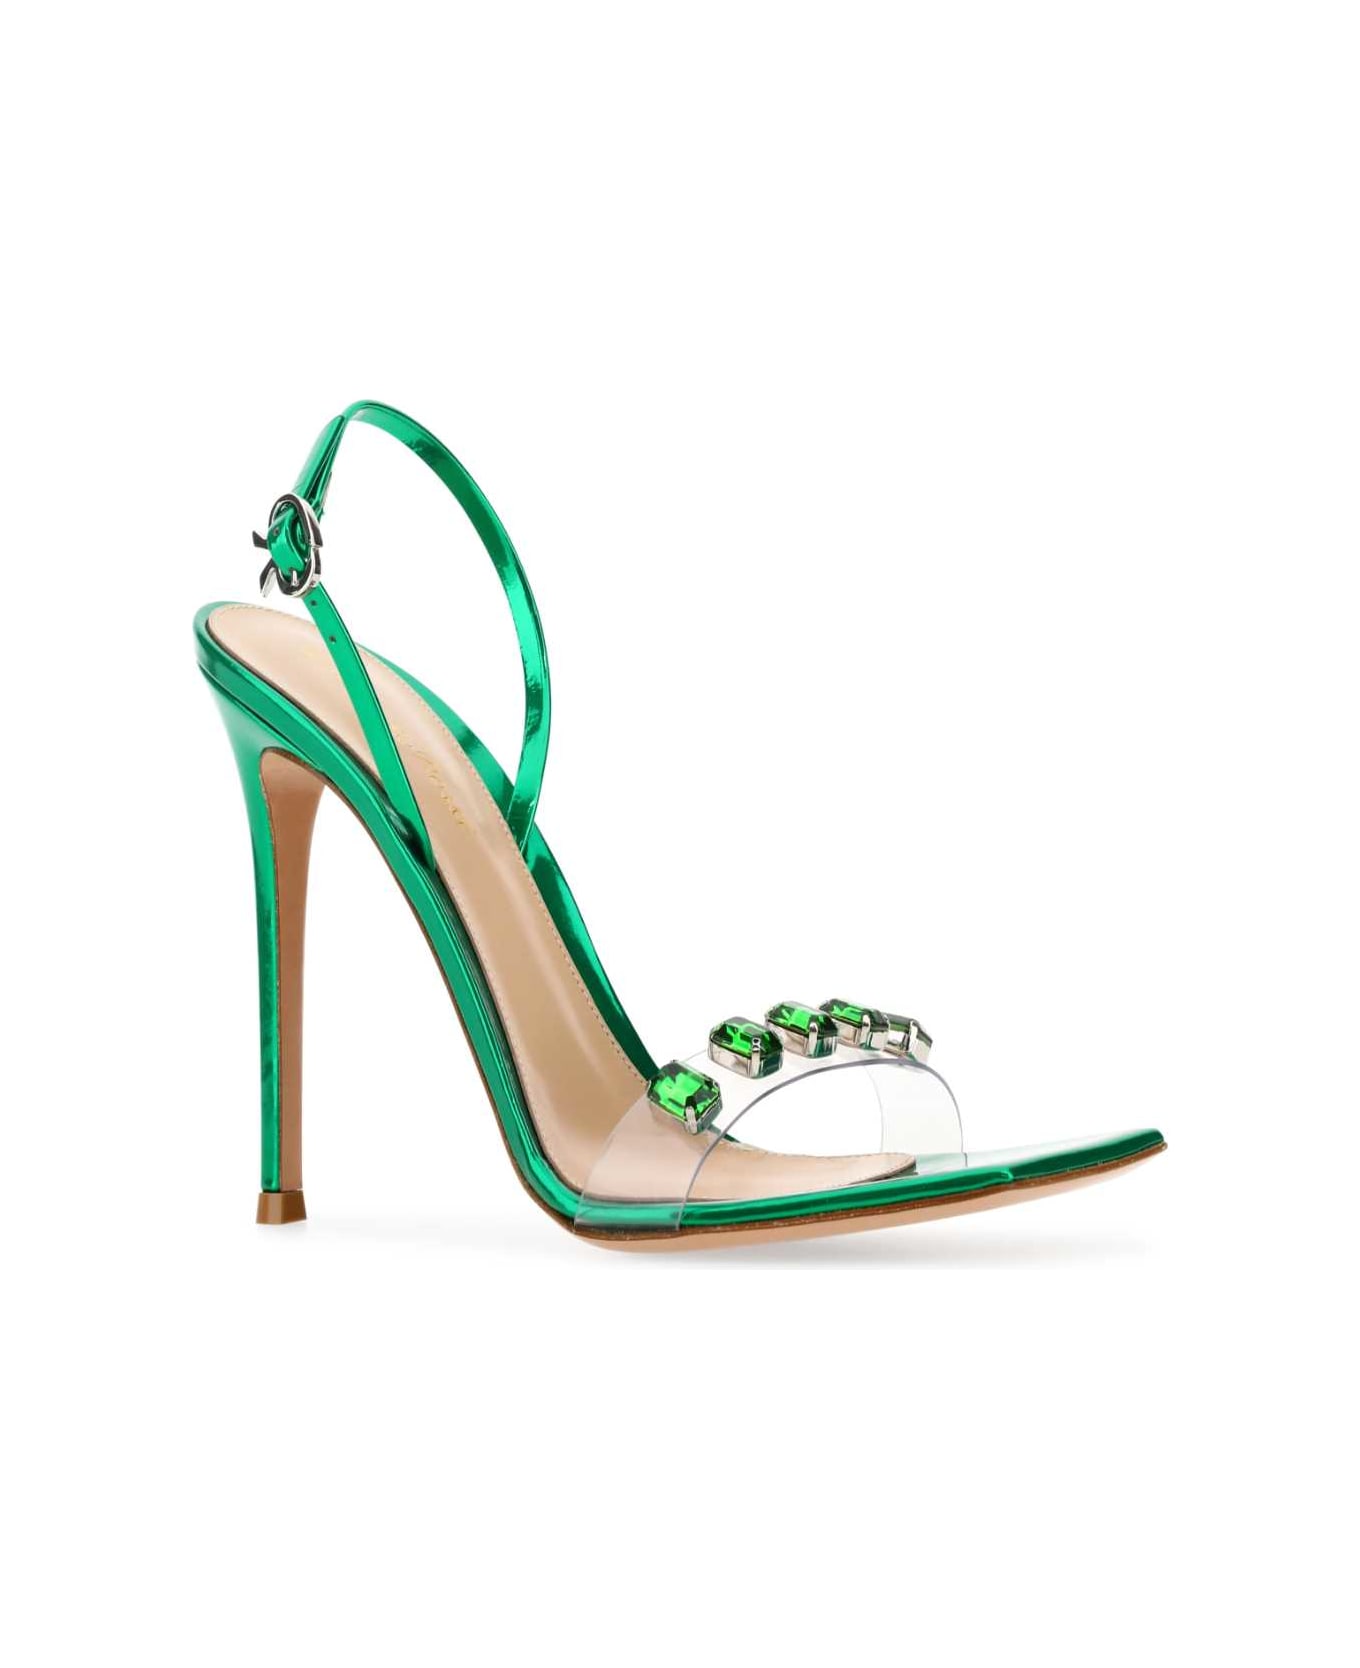 Gianvito Rossi Green Leather â and Pvc Ribbon Candy Sandals - TRGR サンダル